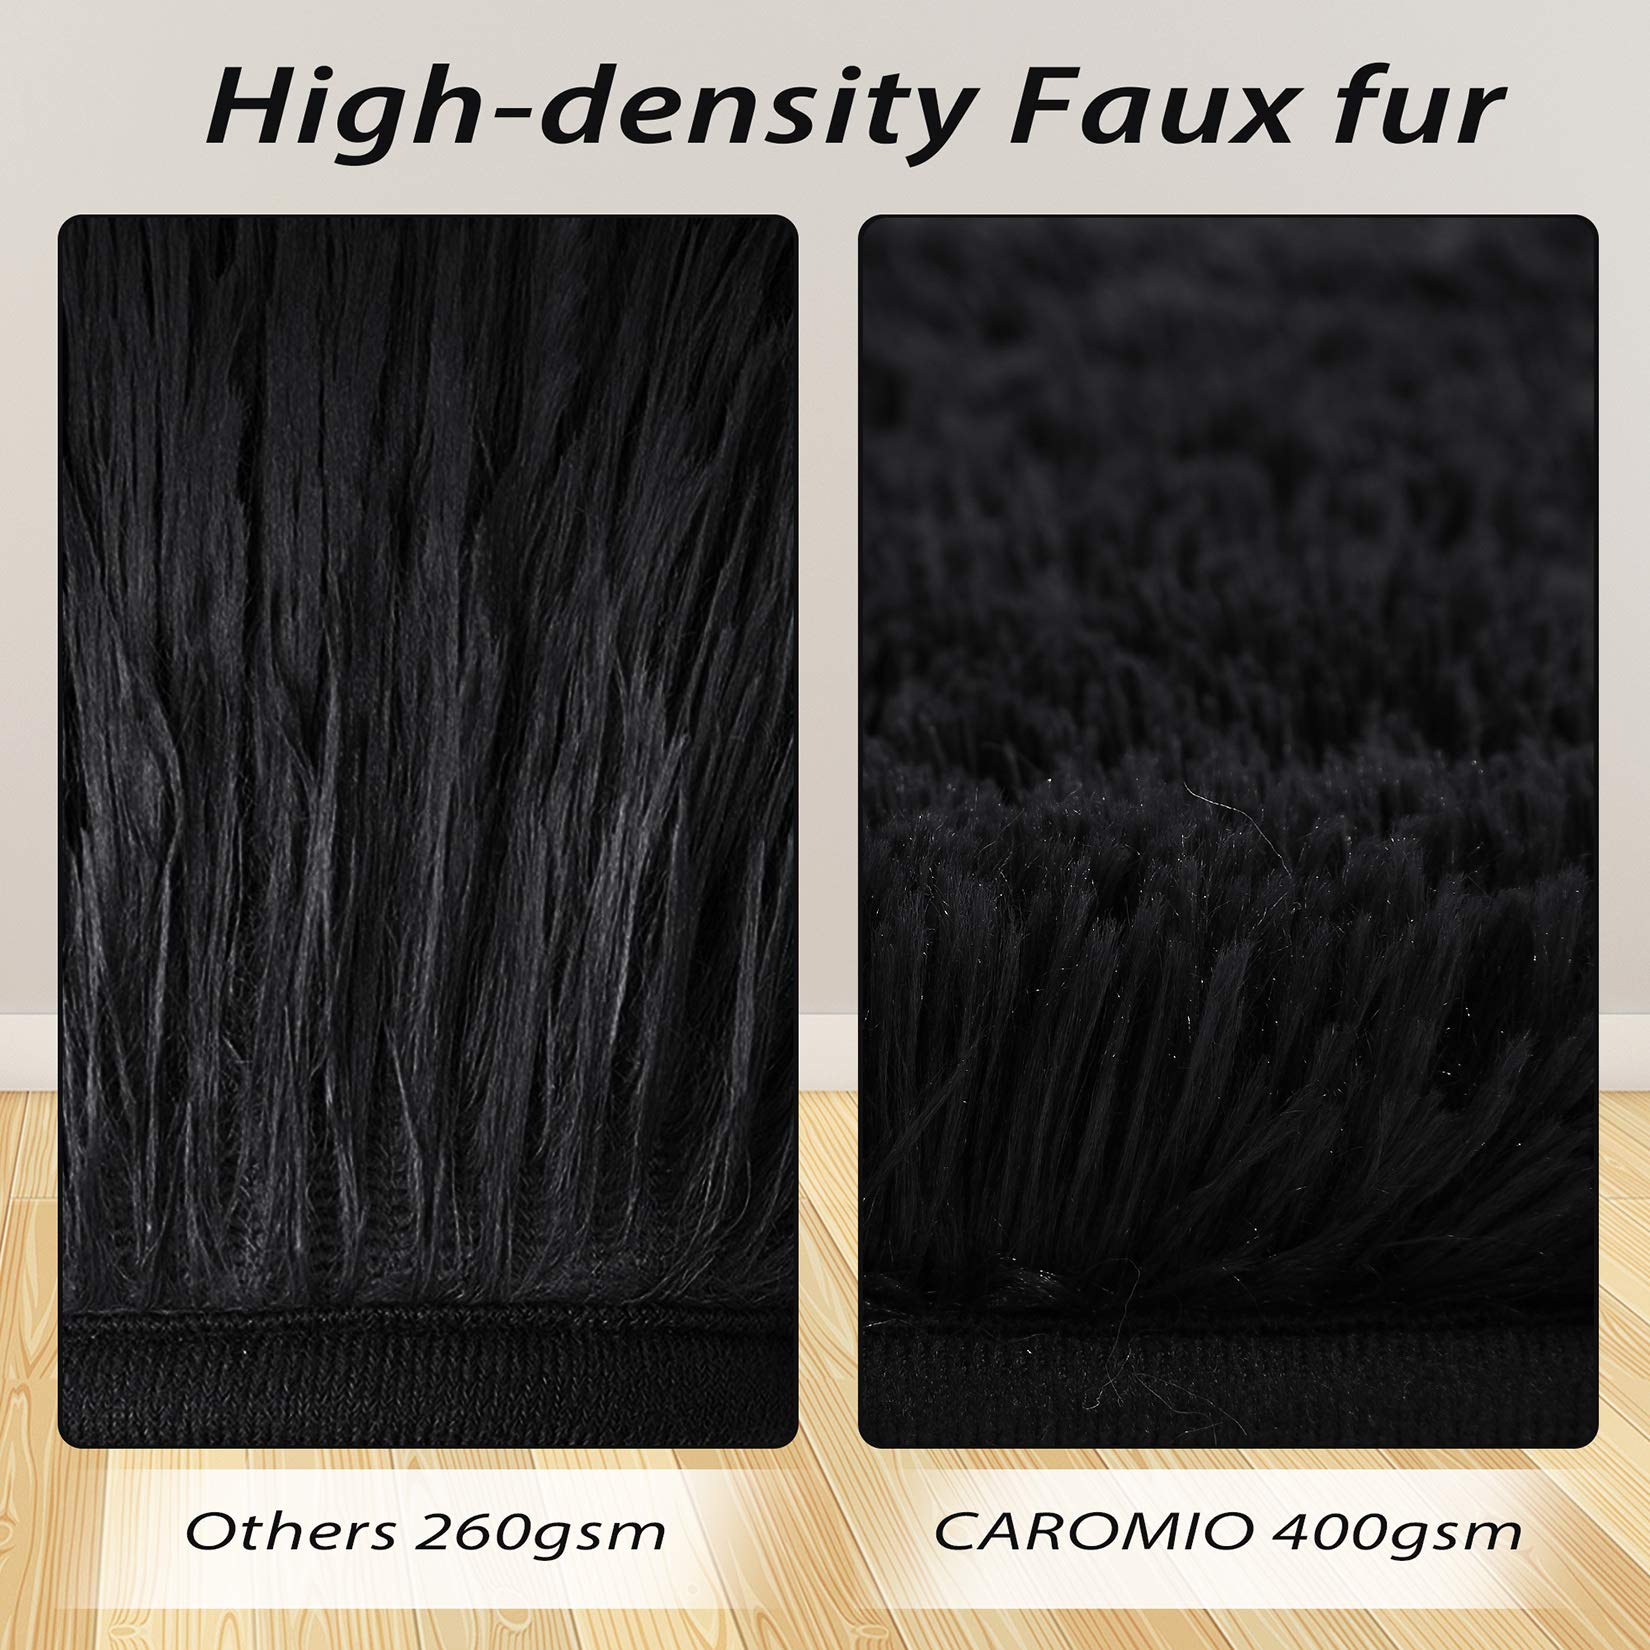 Fluffy Area Rugs for Living Room 9' x 12' Modern Plush and Thick Faux Fur Shag Rug Non-Slip Tie Dye Carpet for Bedroom, Fuzzy Shaggy Rugs for Kids Nursery Dorm